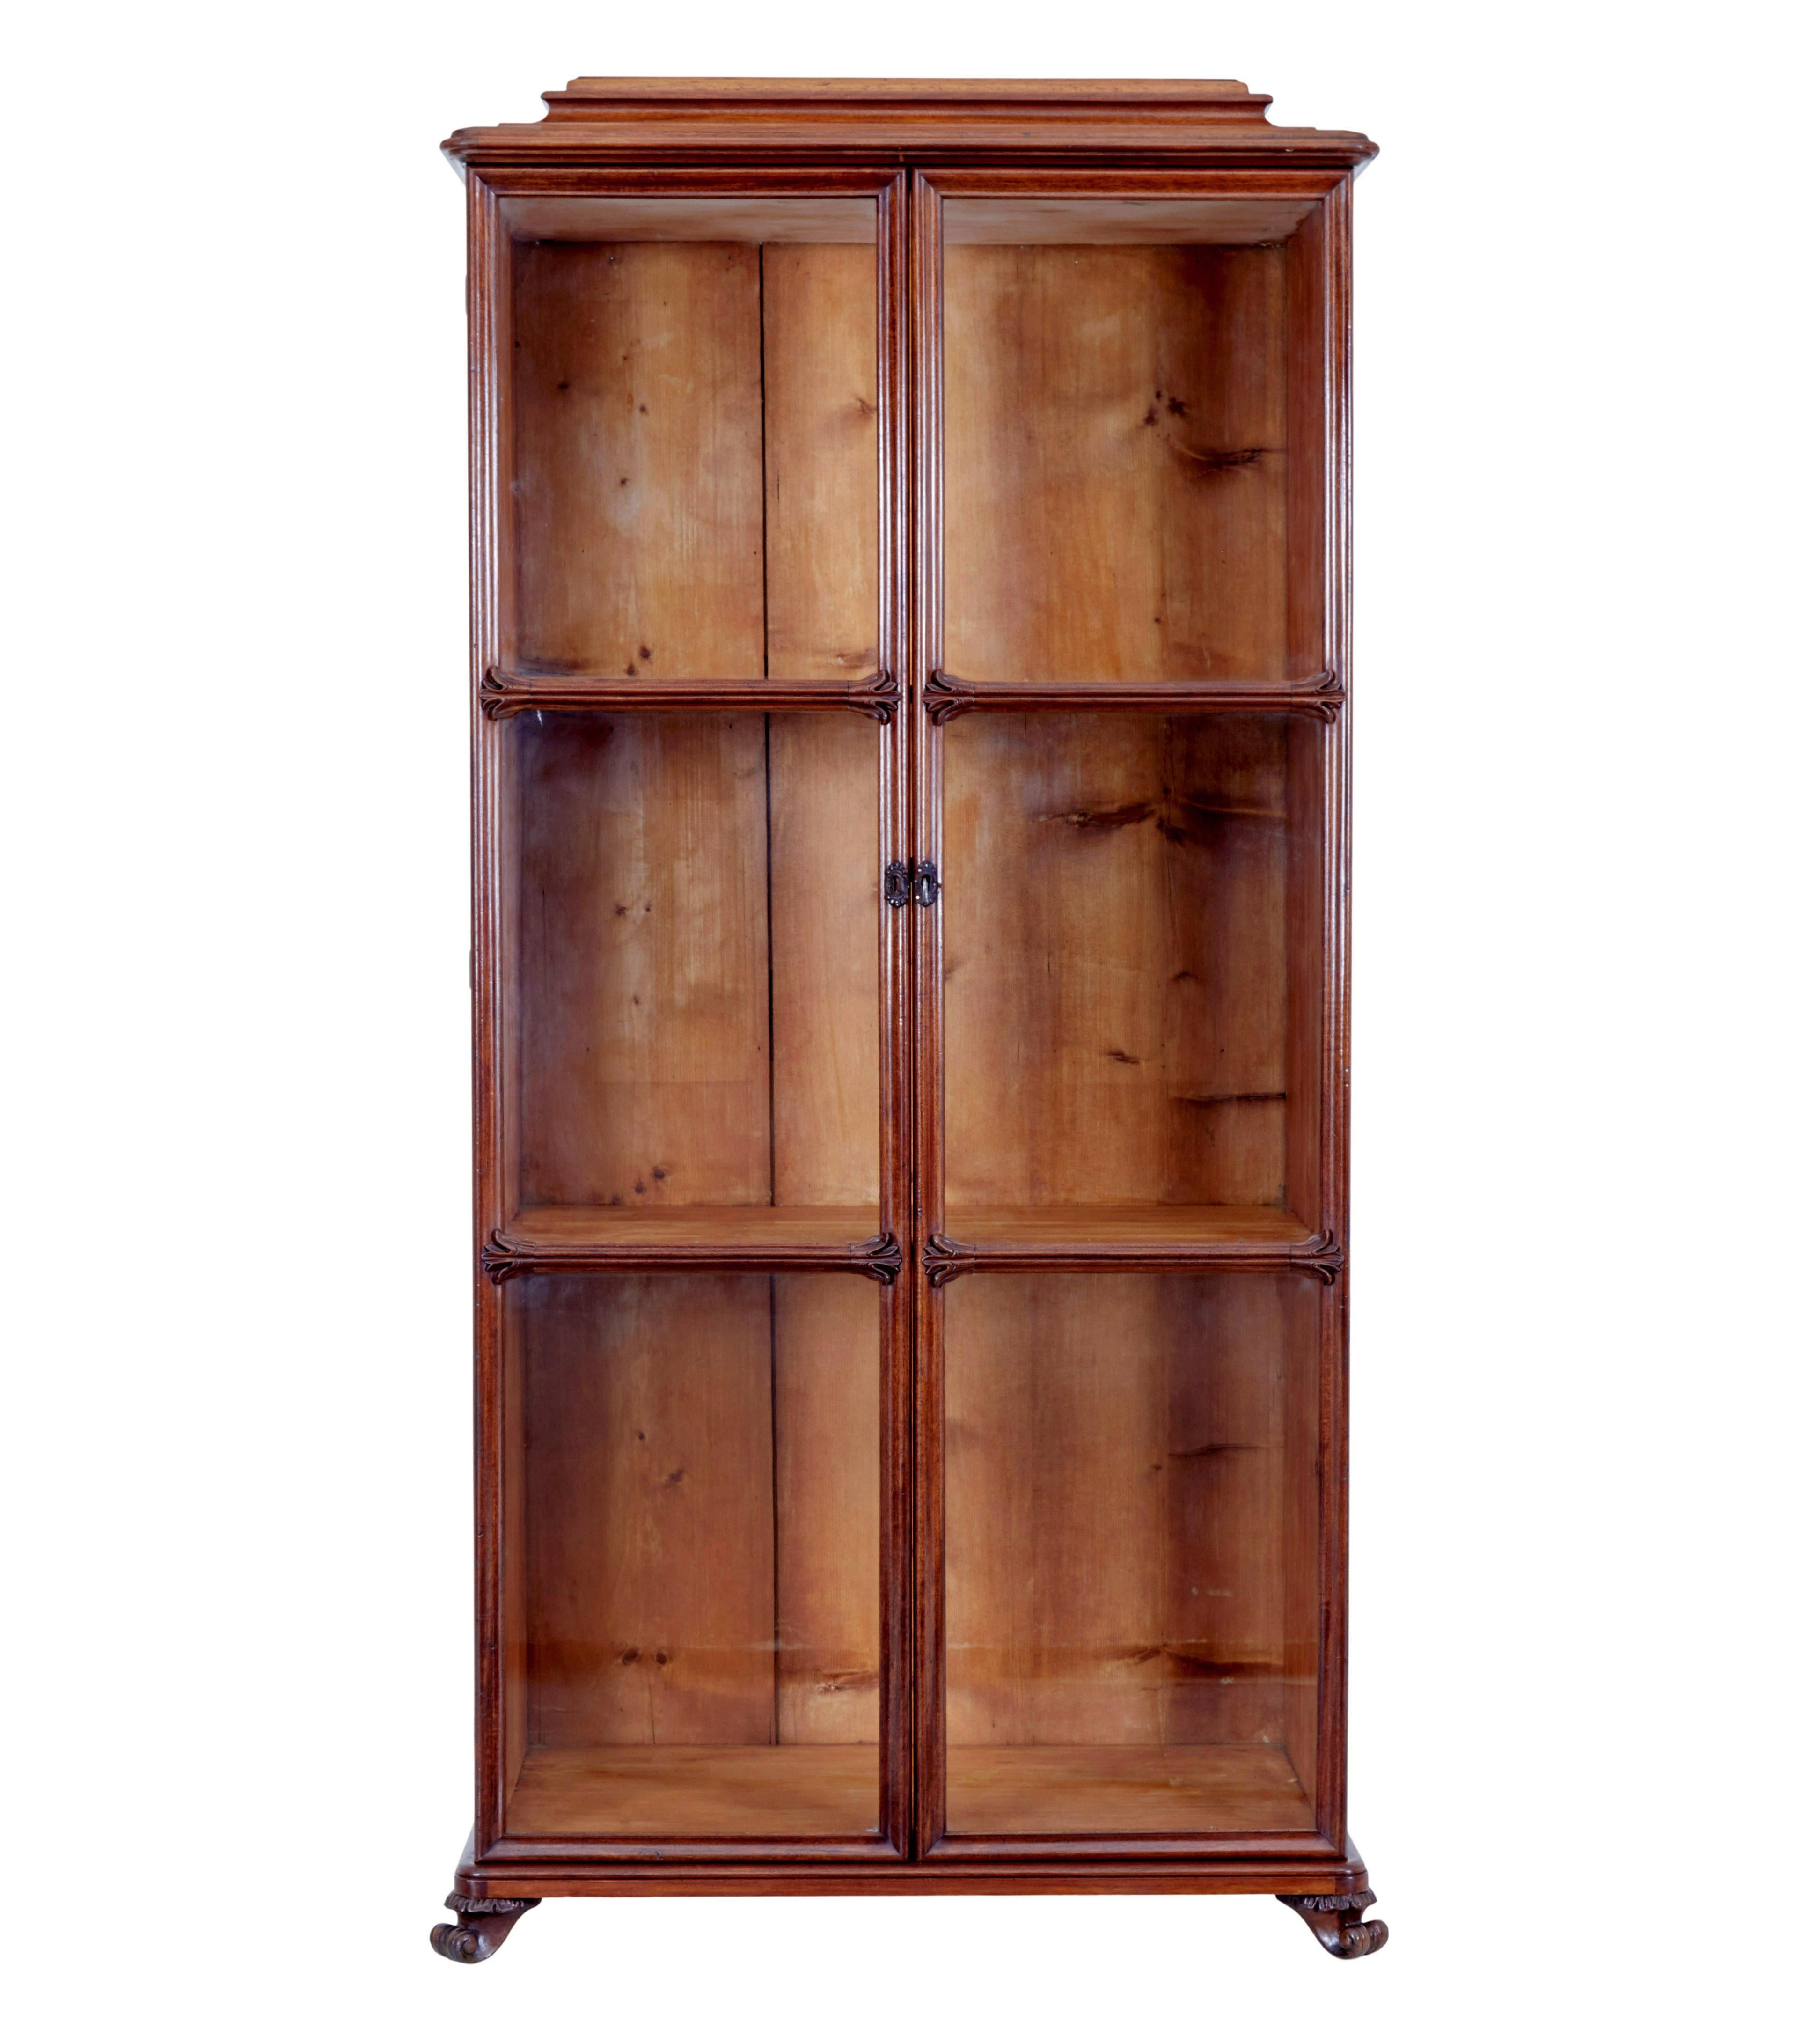 Danish mid 19th century mahogany glazed display cabinet circa 1860.

Good quality danish piece of furniture with strong earlier 19th century english and french influences.

Caddy top, which sits above the double glazed doors, each with 3 panels